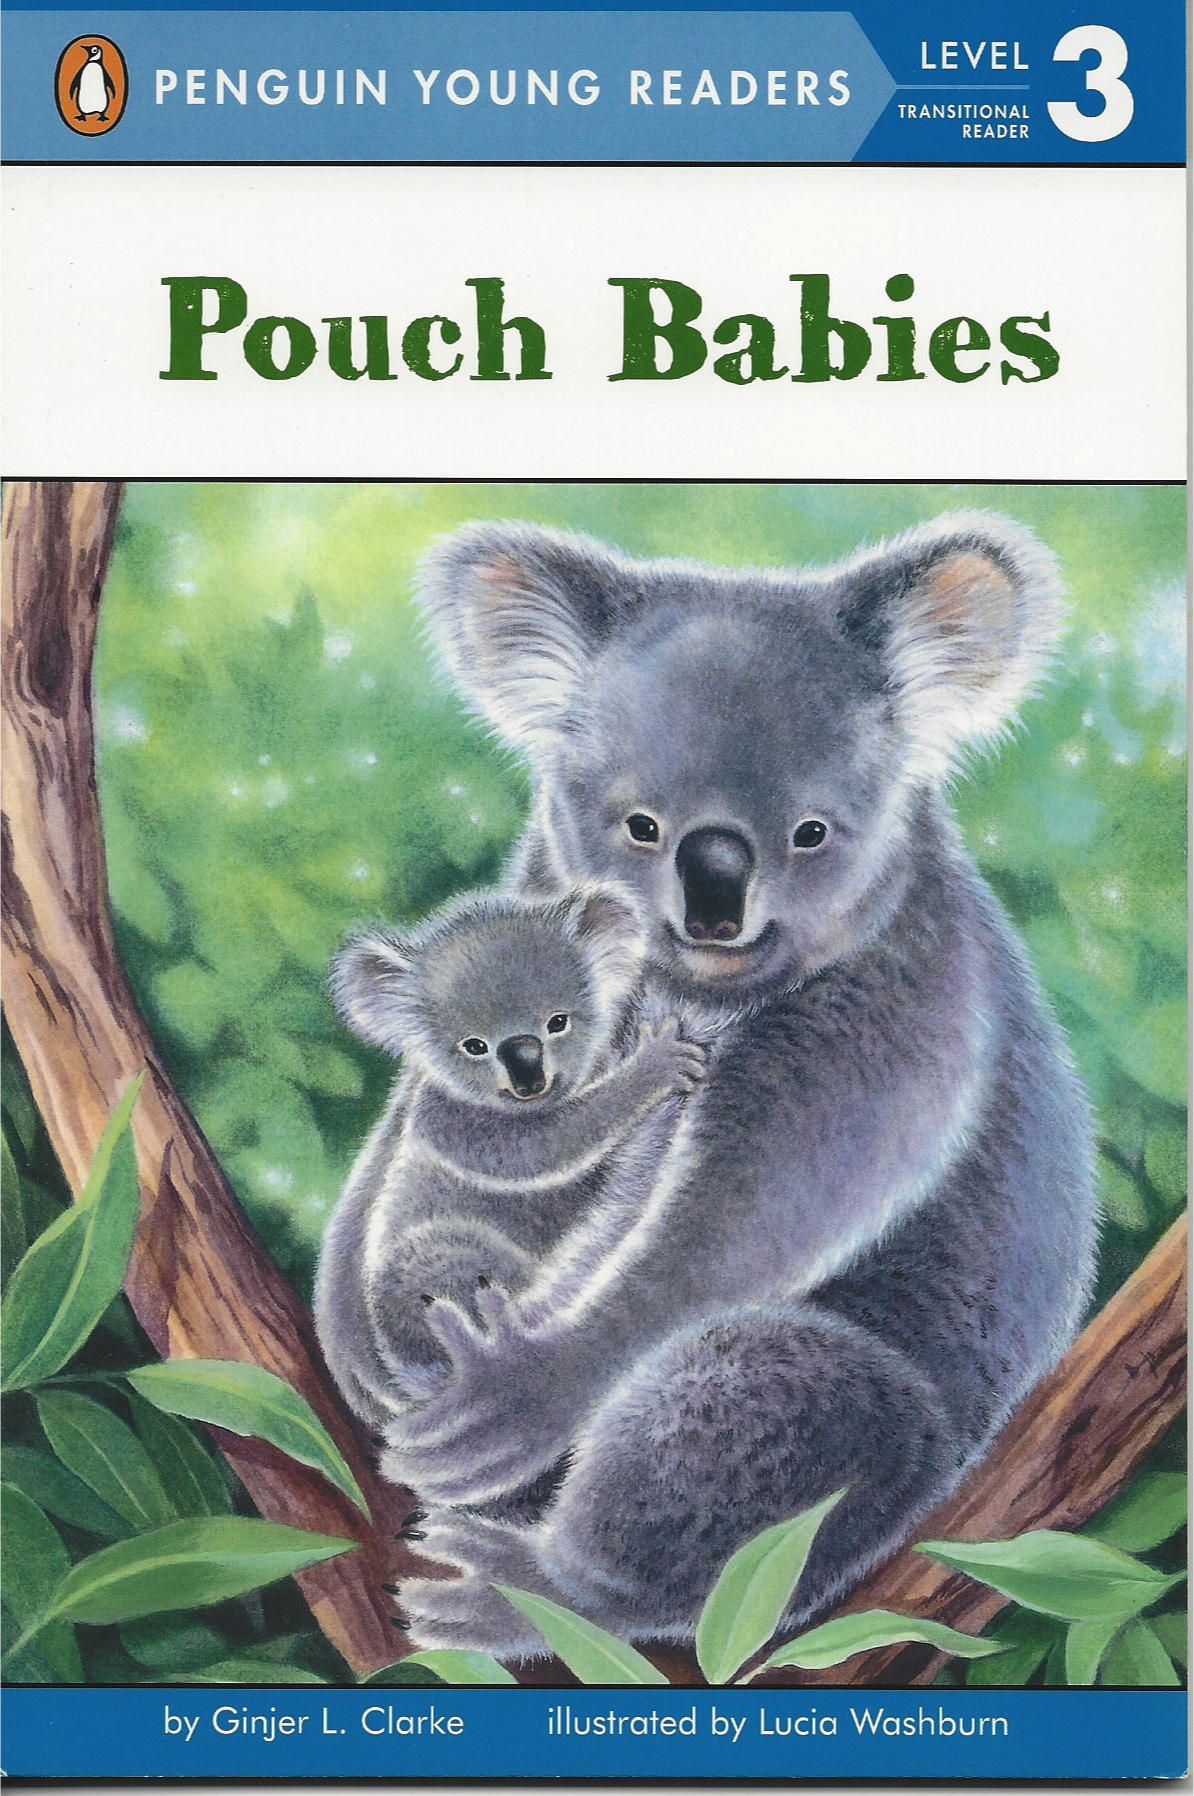 Pouch Babies